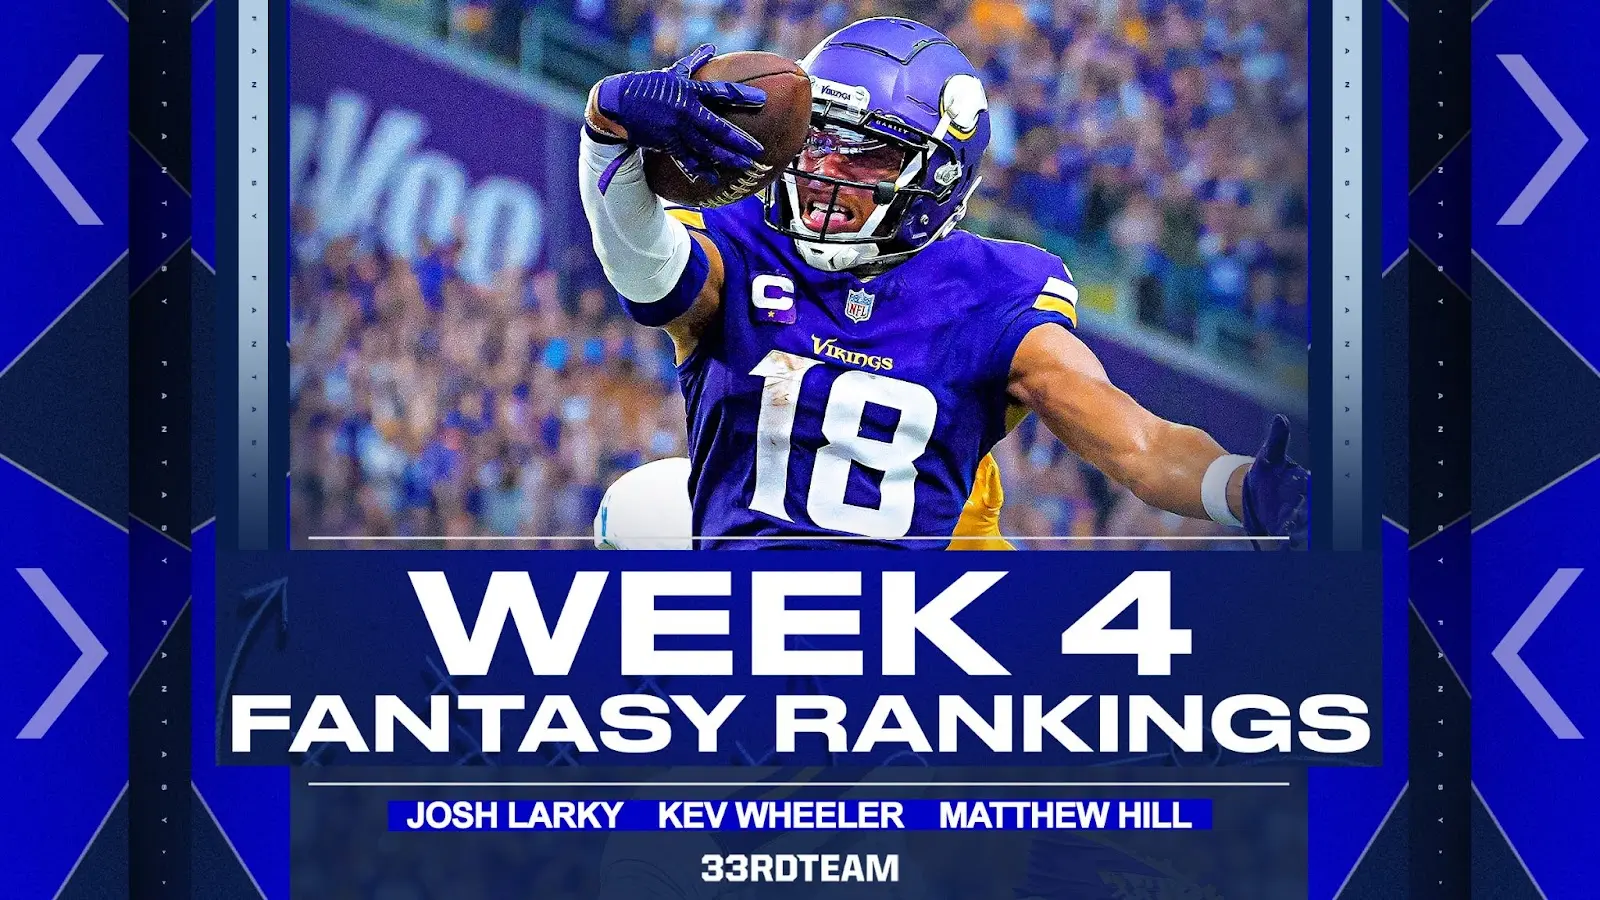 Fantasy football rankings 2022: The best PPR tiers heading into the season  - DraftKings Network